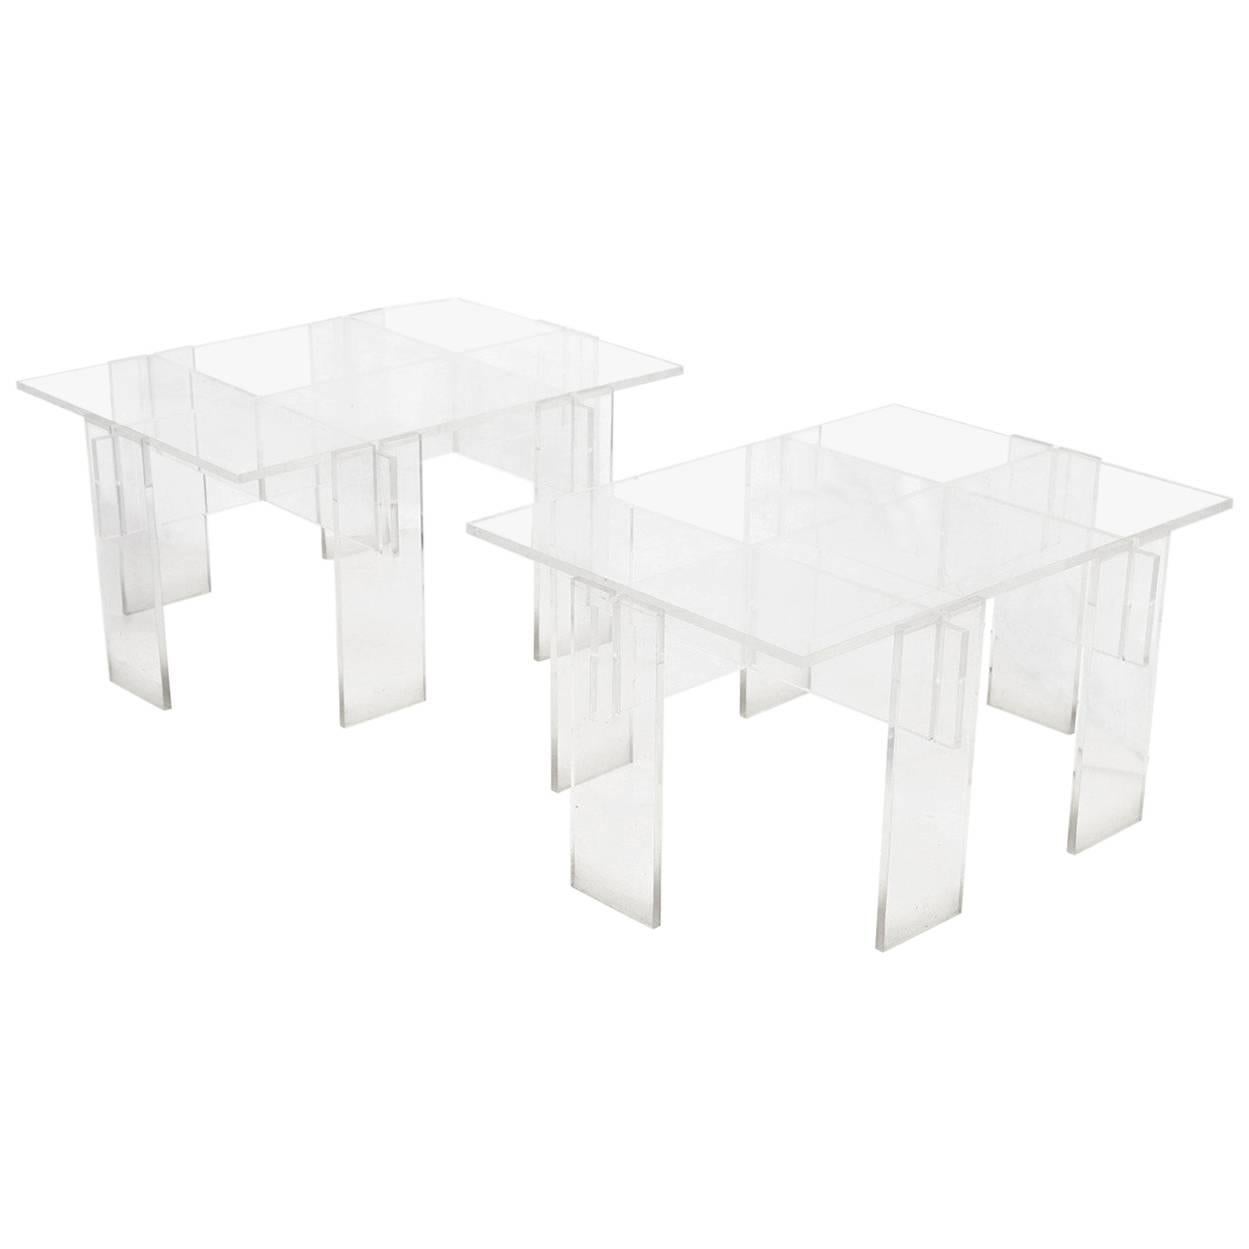 Pair of Lucite "Puzzle" Low Tables For Sale